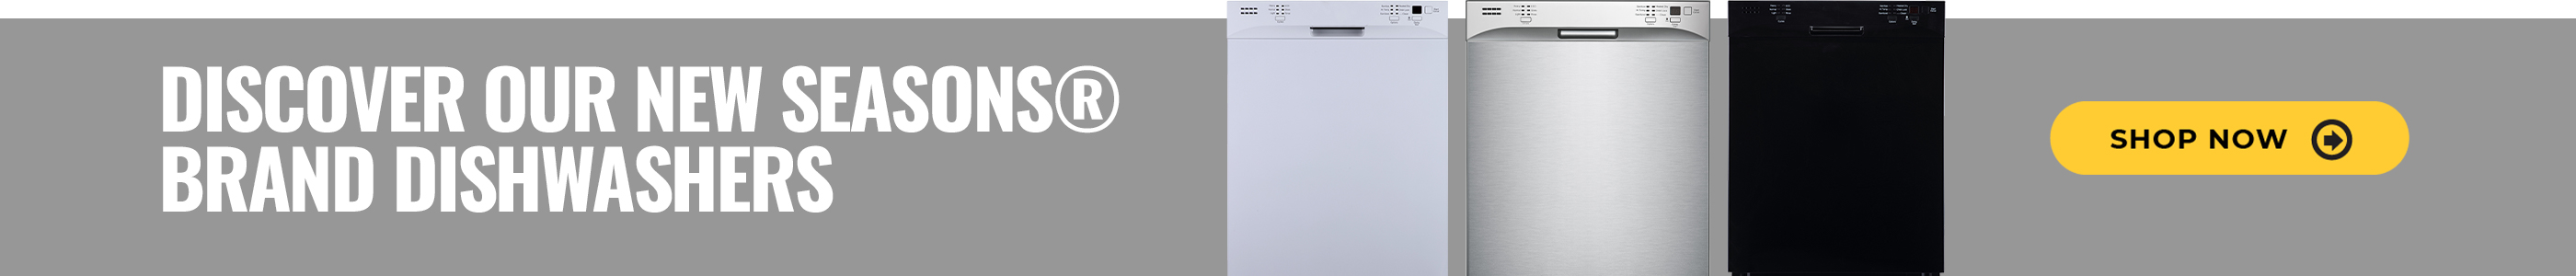 Discover Our New Seasons Brand Dishwashers